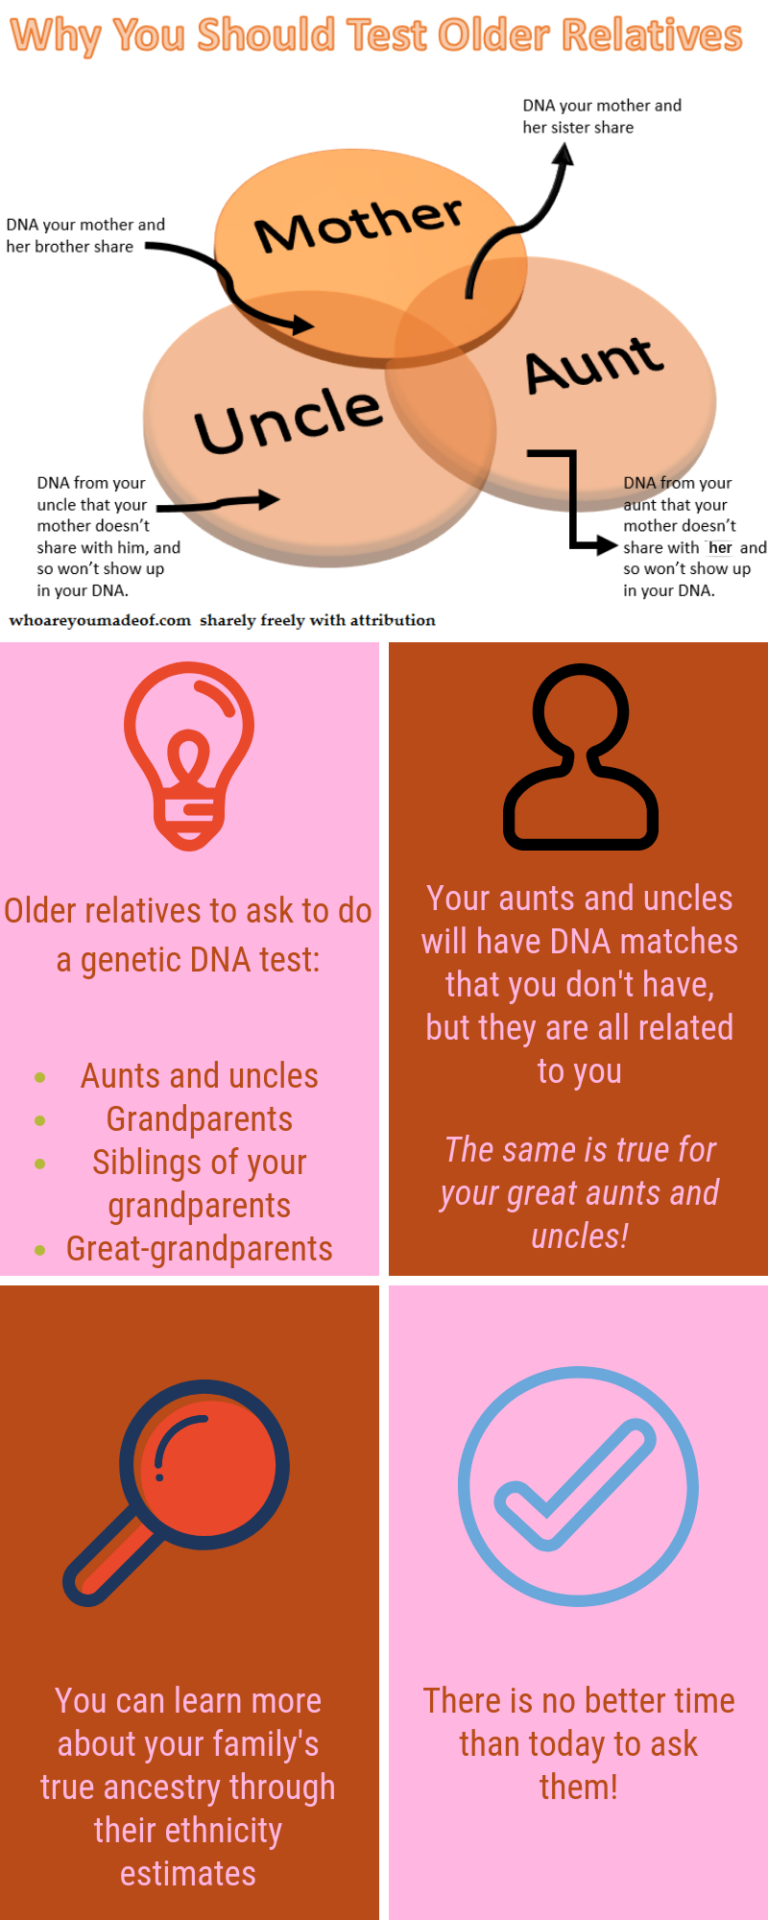 NEW: MyHeritage DNA tests for genealogy! - MyHeritage Blog